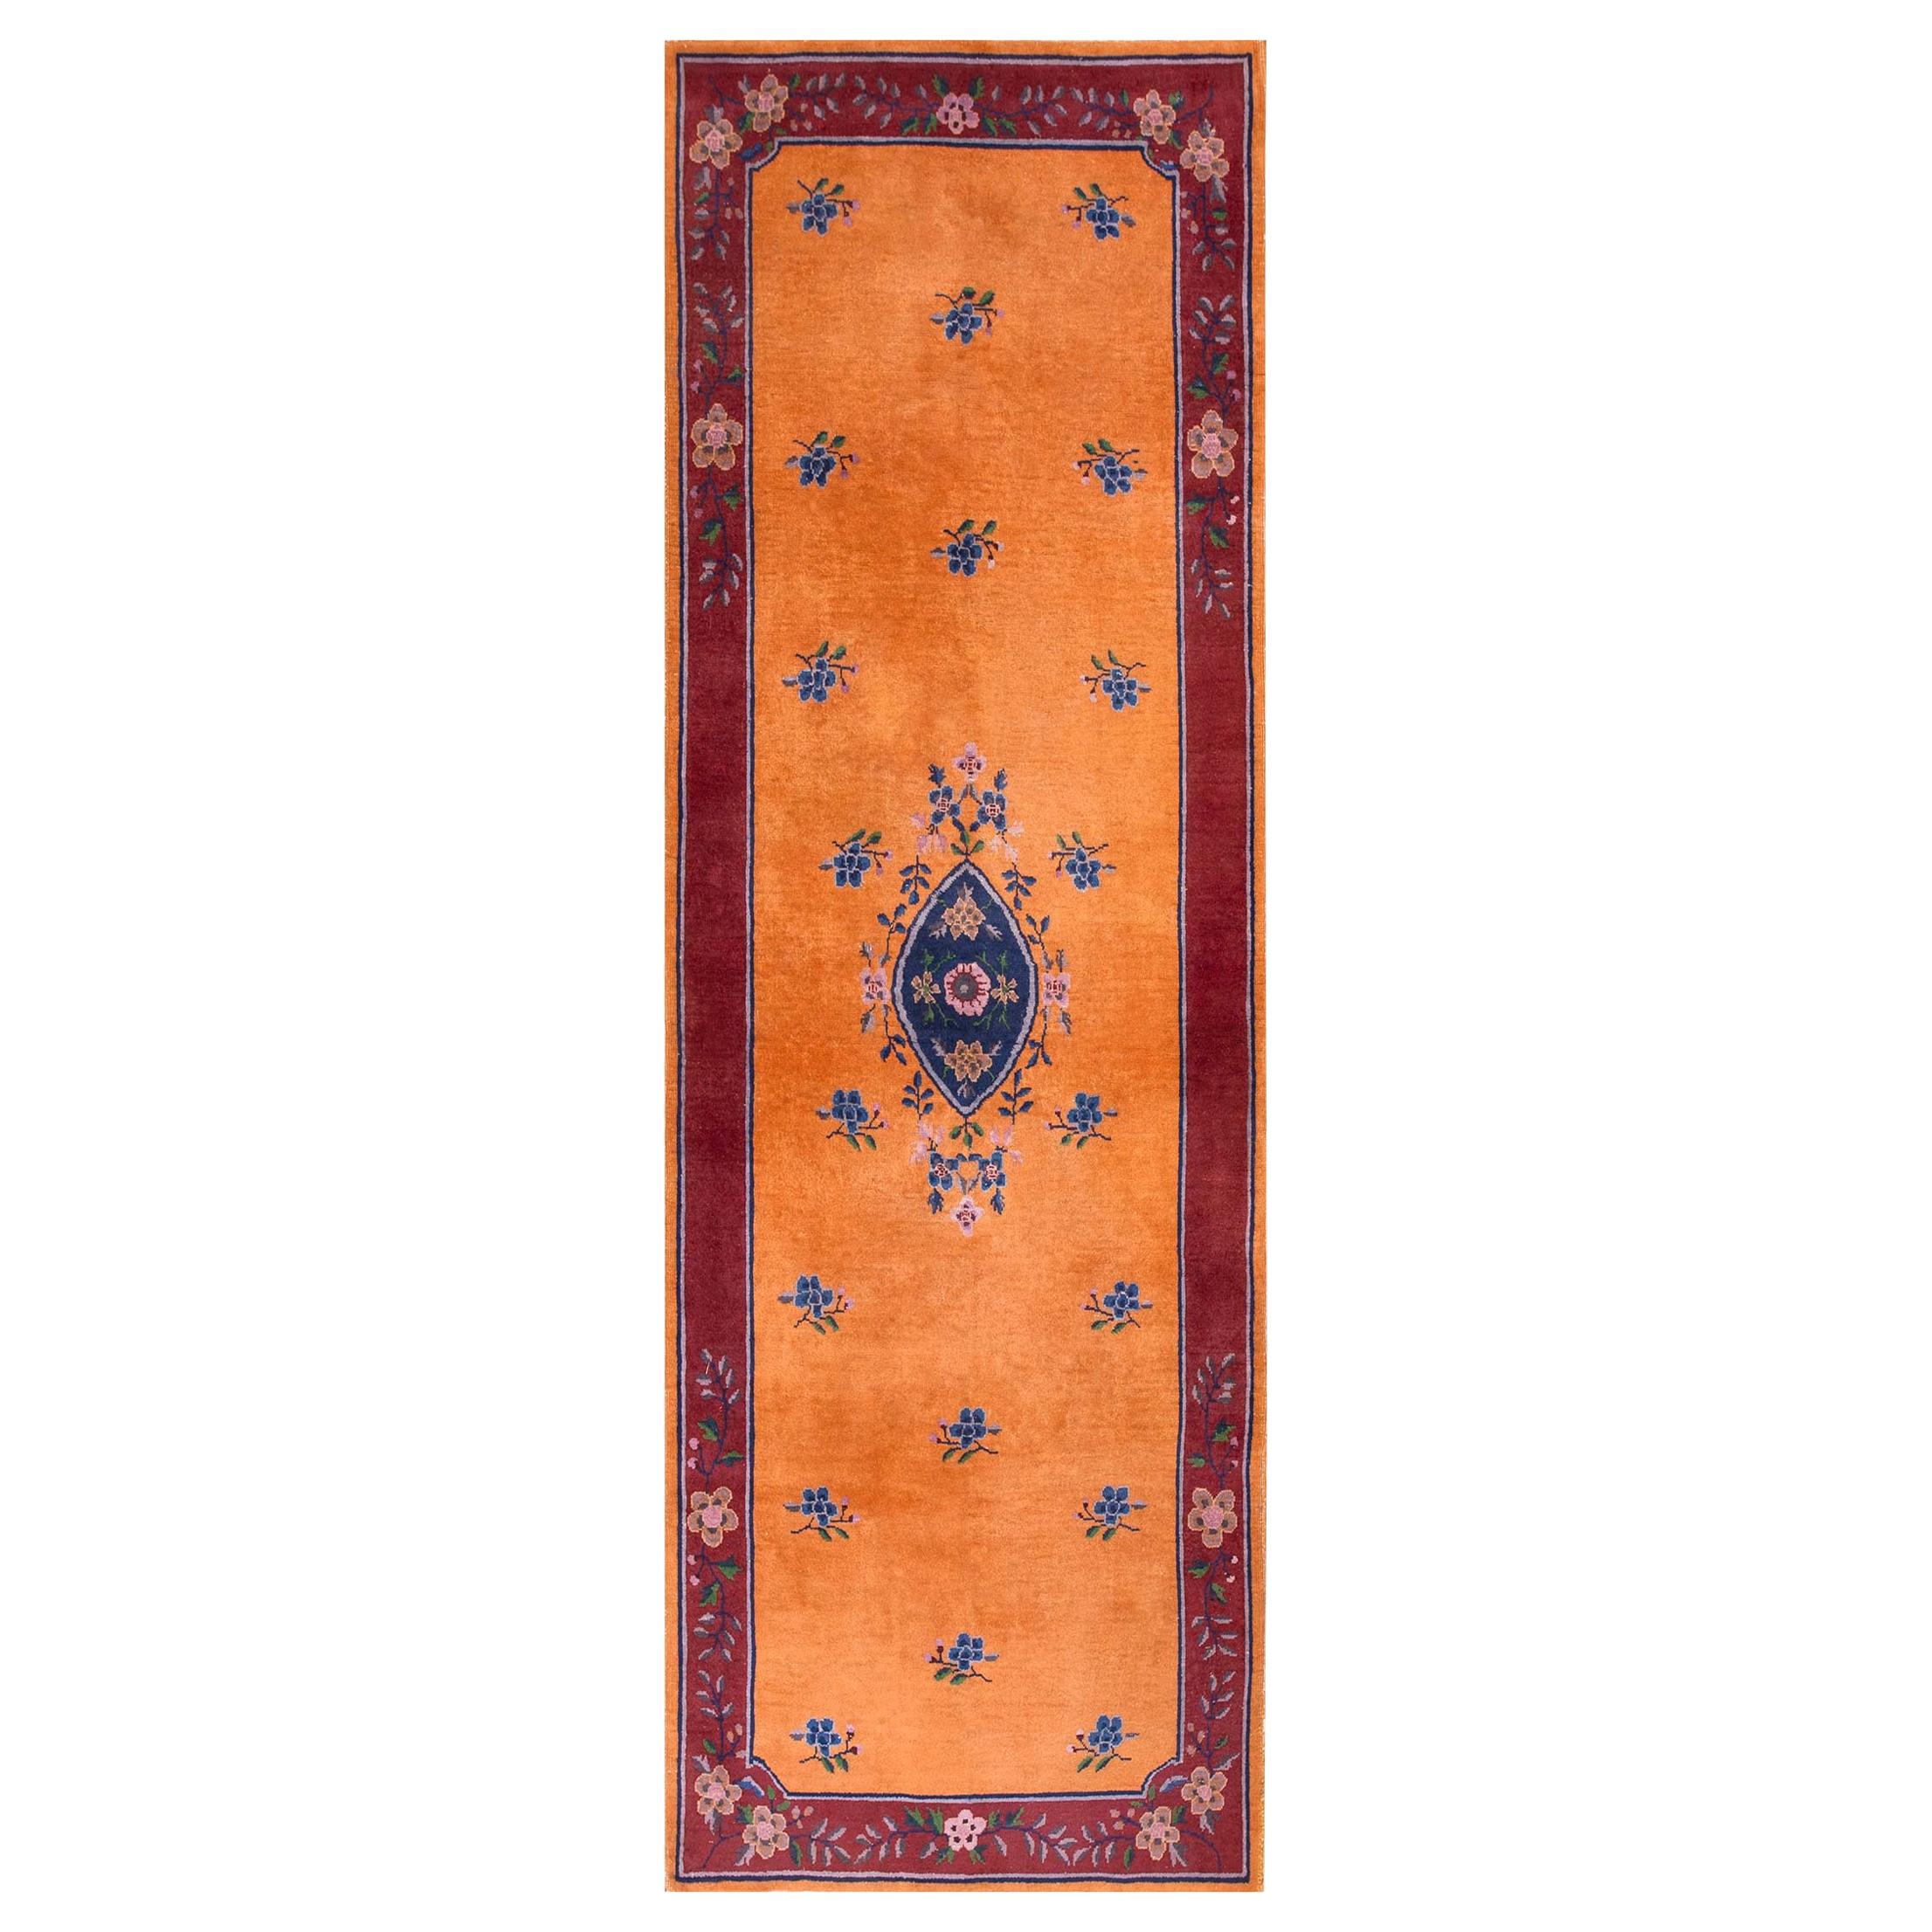 1920s Chinese Art Deco Carpet ( 4 x 10' - 122 x 305 ) For Sale